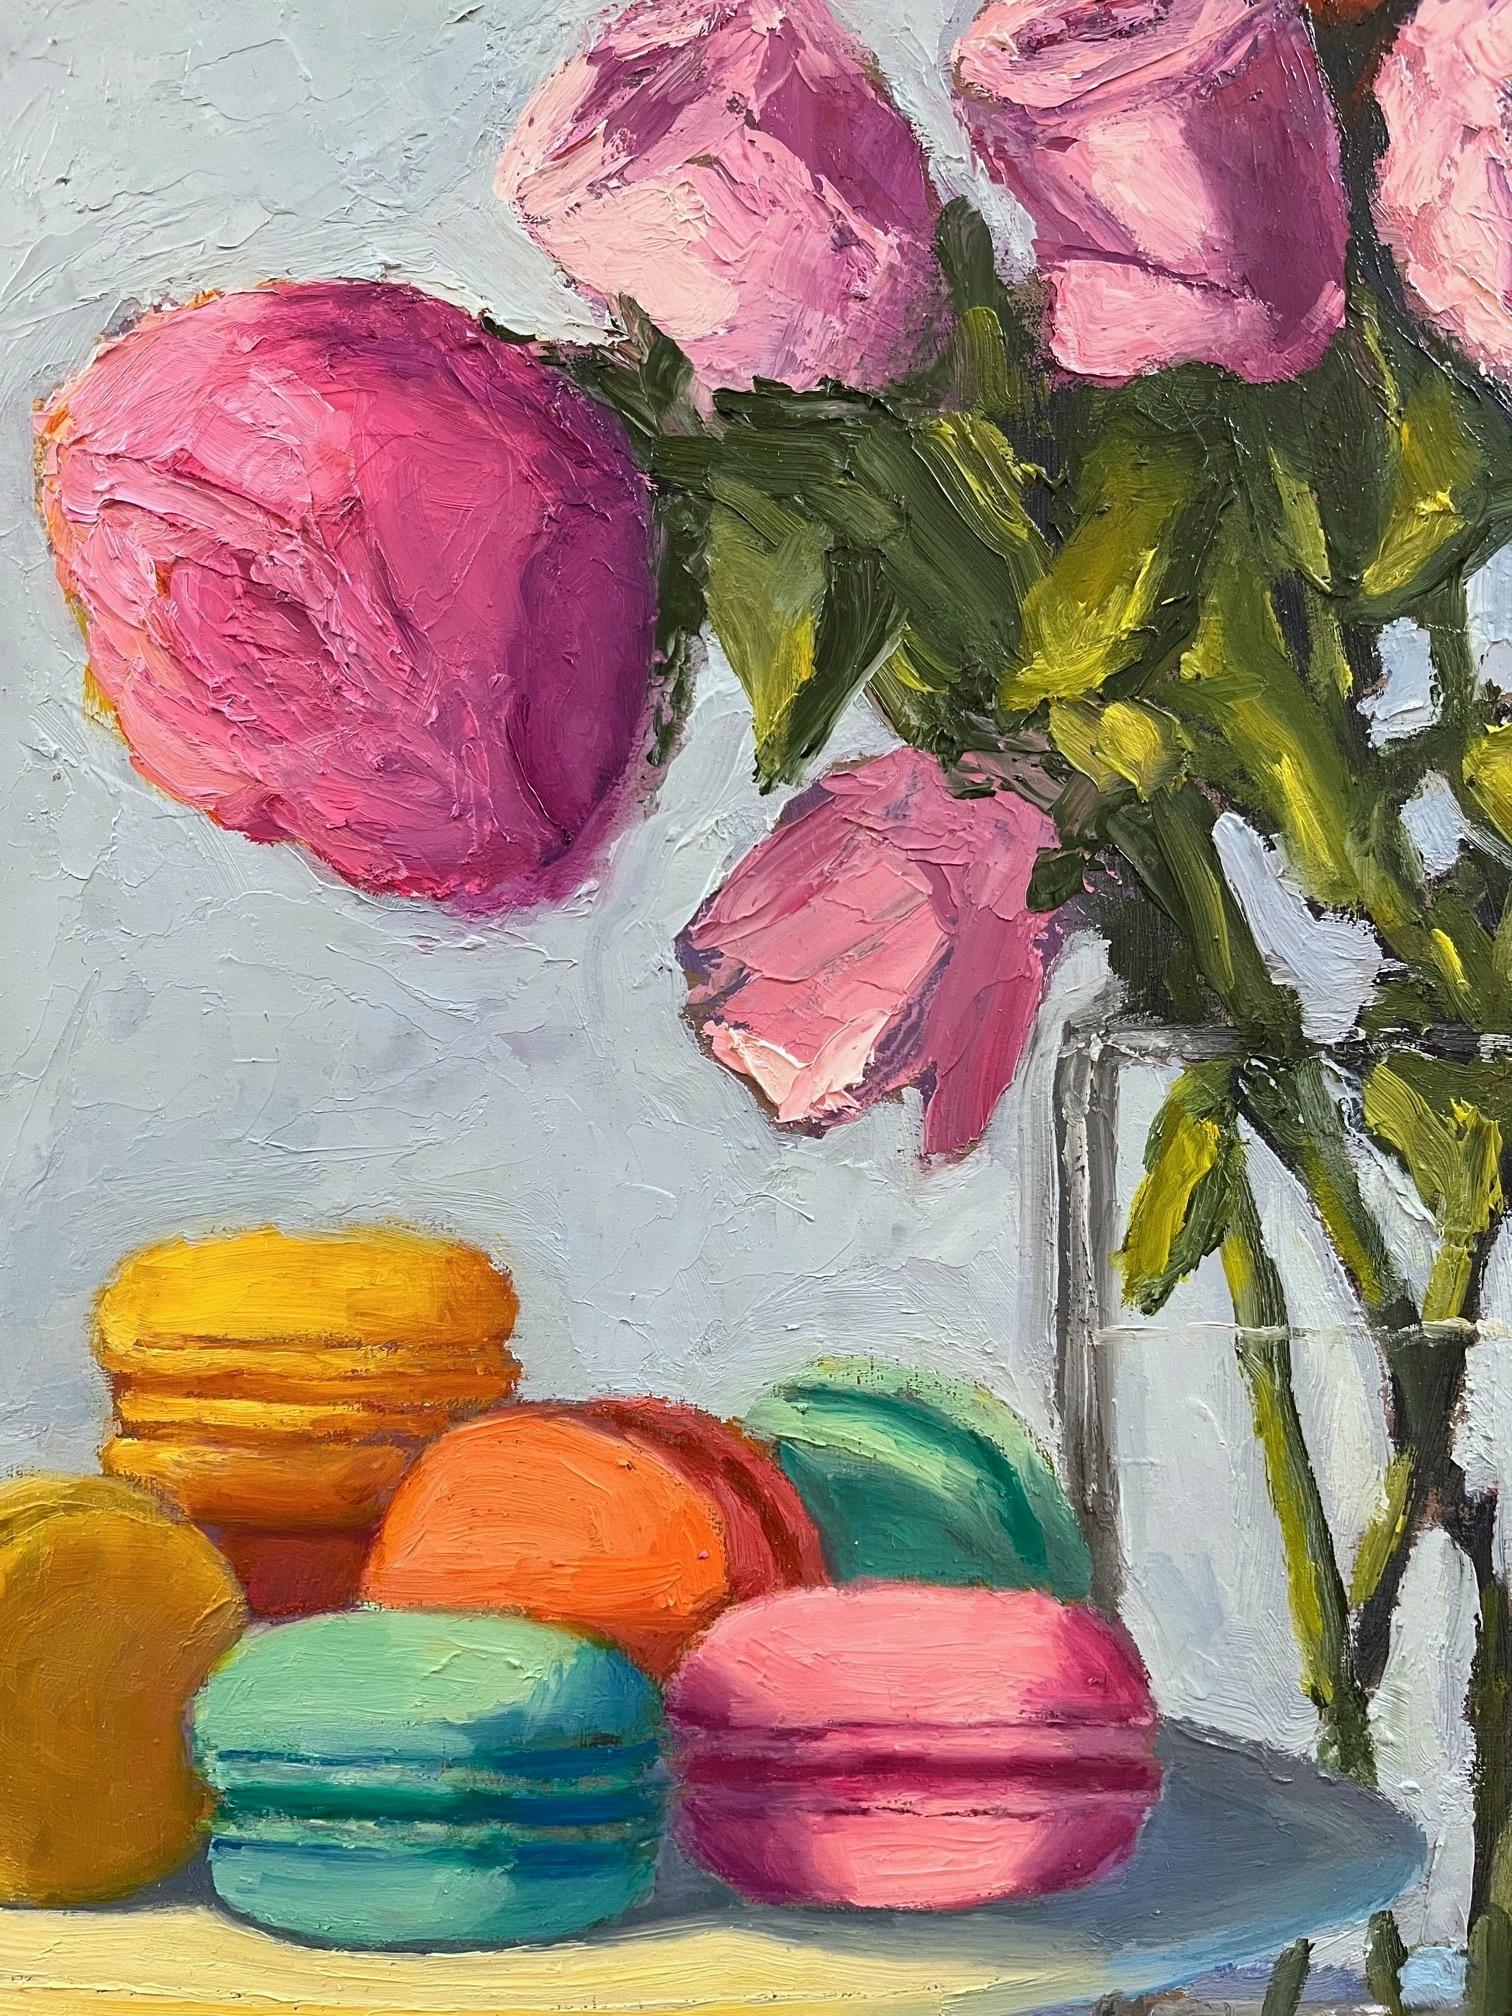 <p>Artist Comments<br />Artist Pat Doherty displays colorful macarons on a pedestal plate next to an arrangement of pink and orange roses. A dainty blue striped tablecloth covers the table it lays on. Her delectable still-life painting draws on her